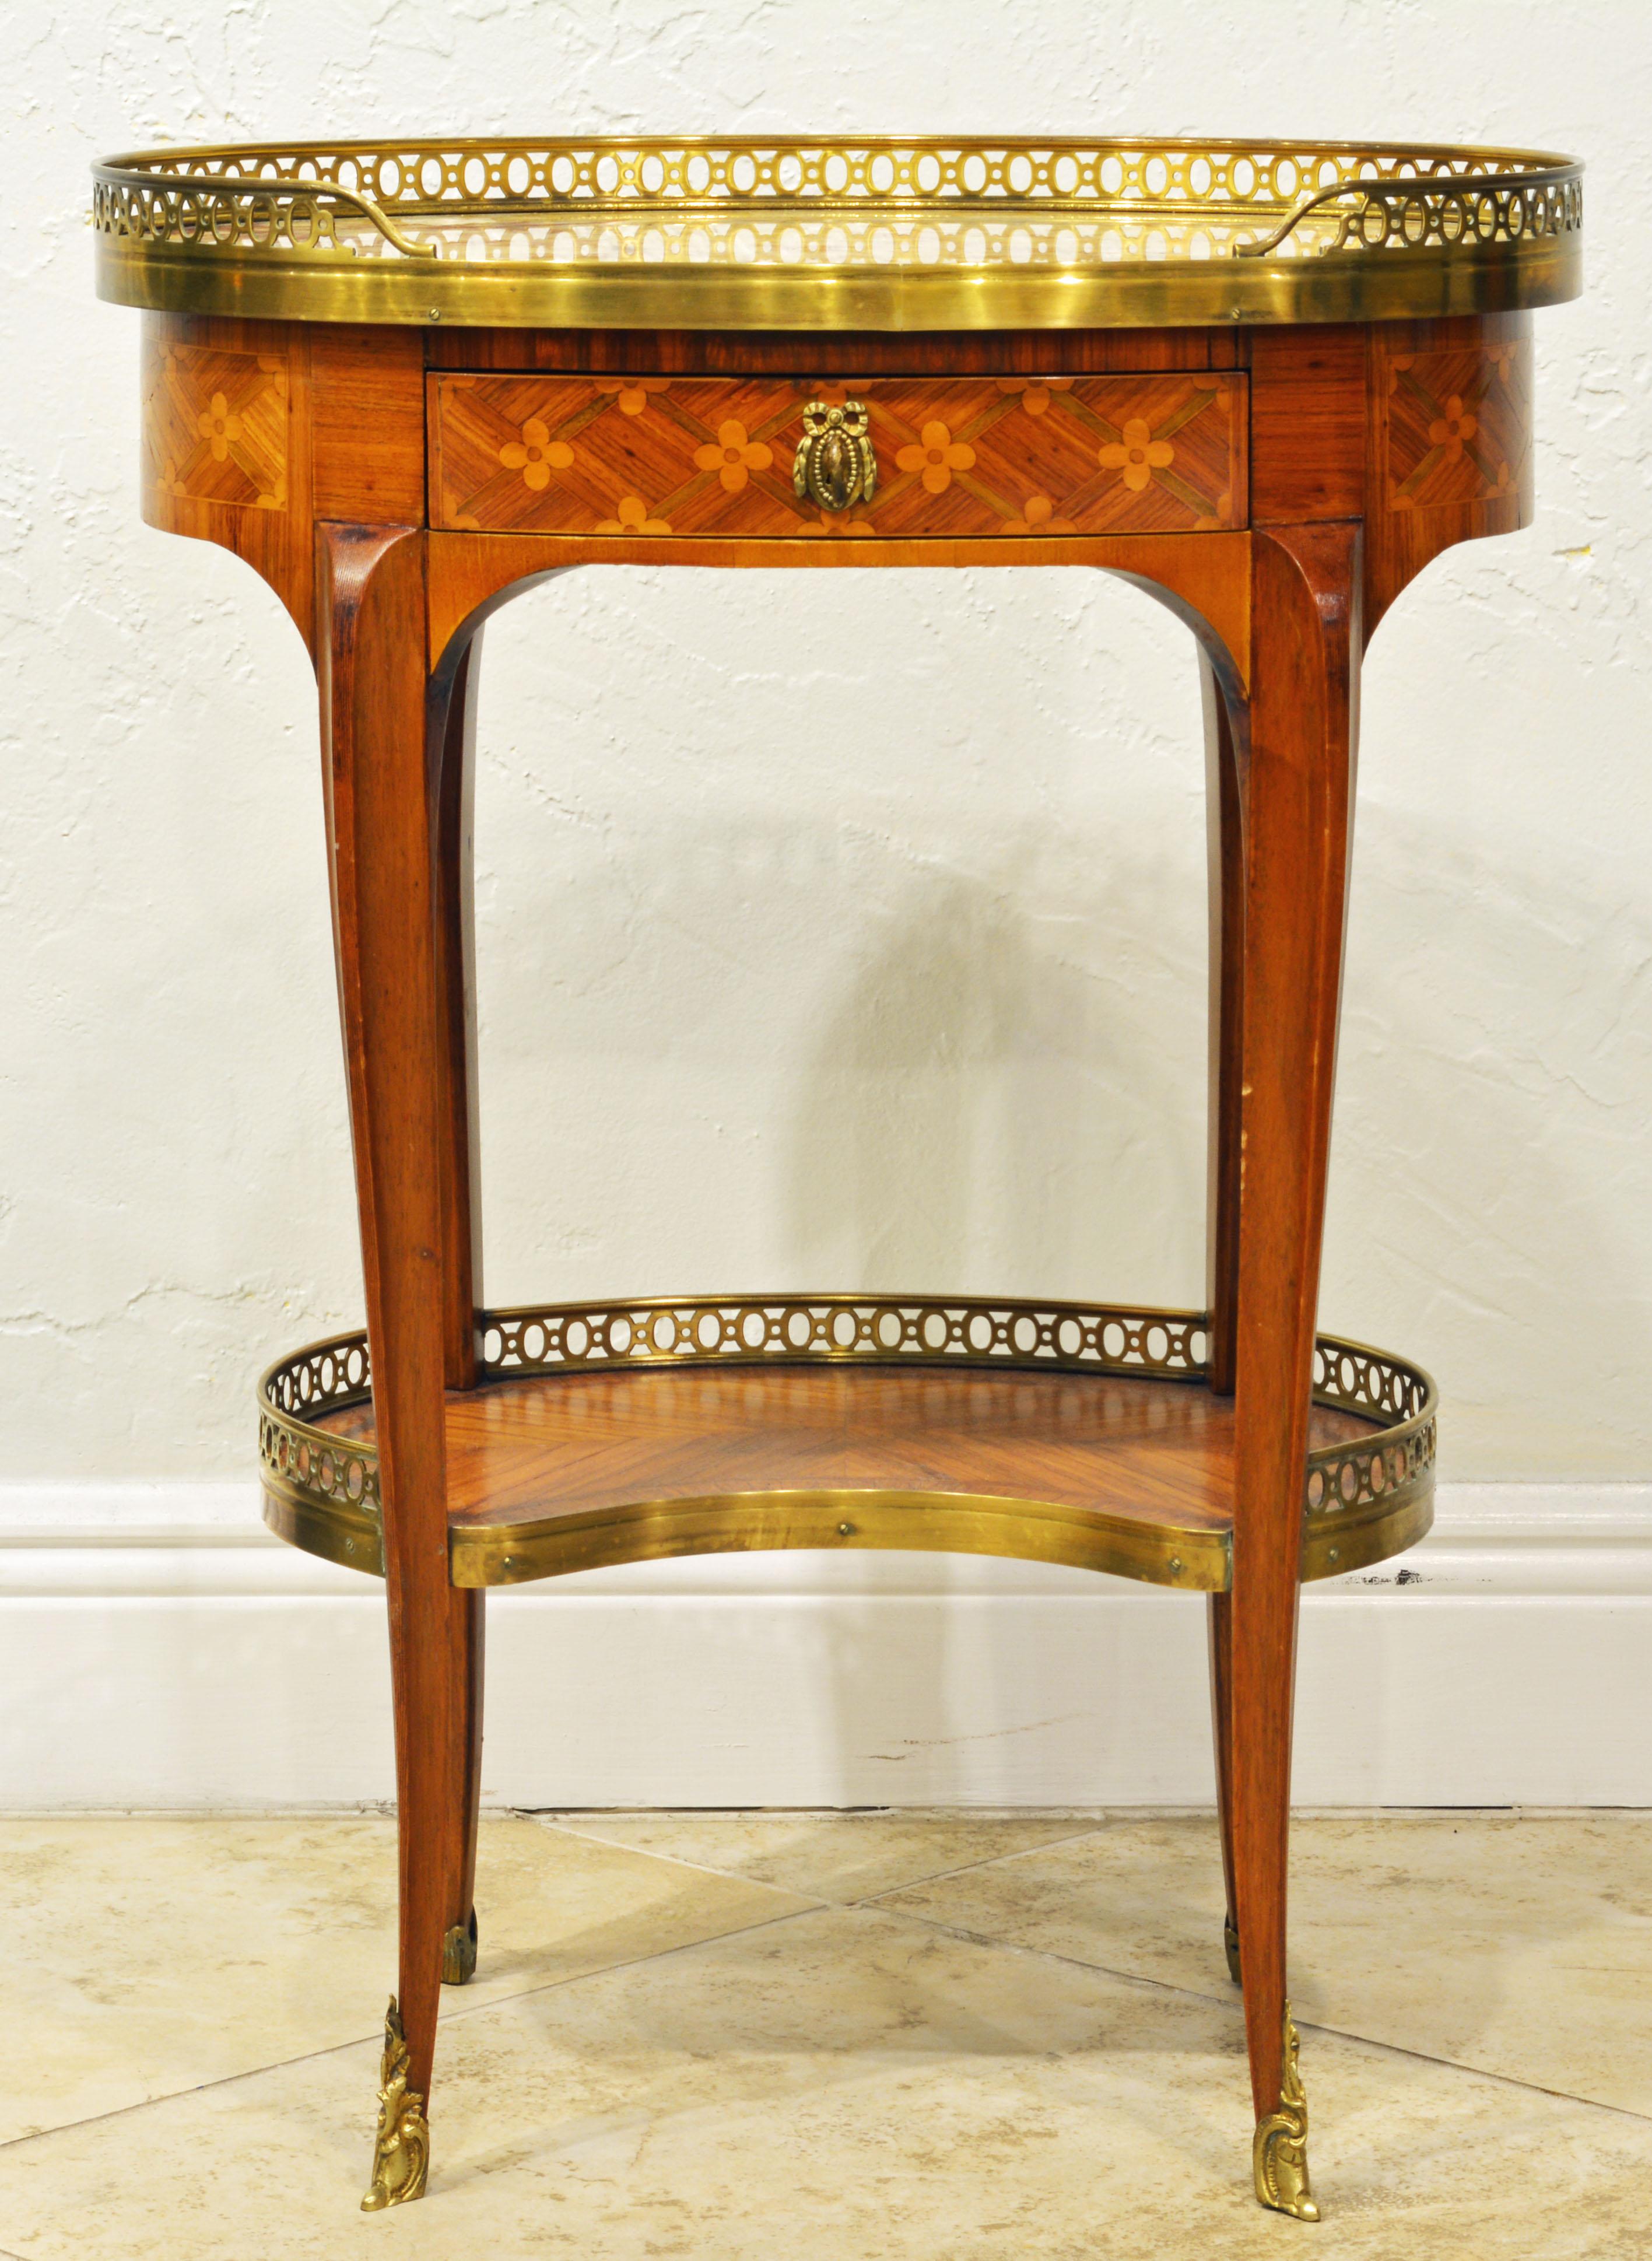 Raised on four shapely cabriole legs with bronze sabots this elegant table in the Louis XV style features a marble top partly surrounded by an intricately pierced bronze gallery above one frieze drawer and a lower similar gallery tier. The surfaces